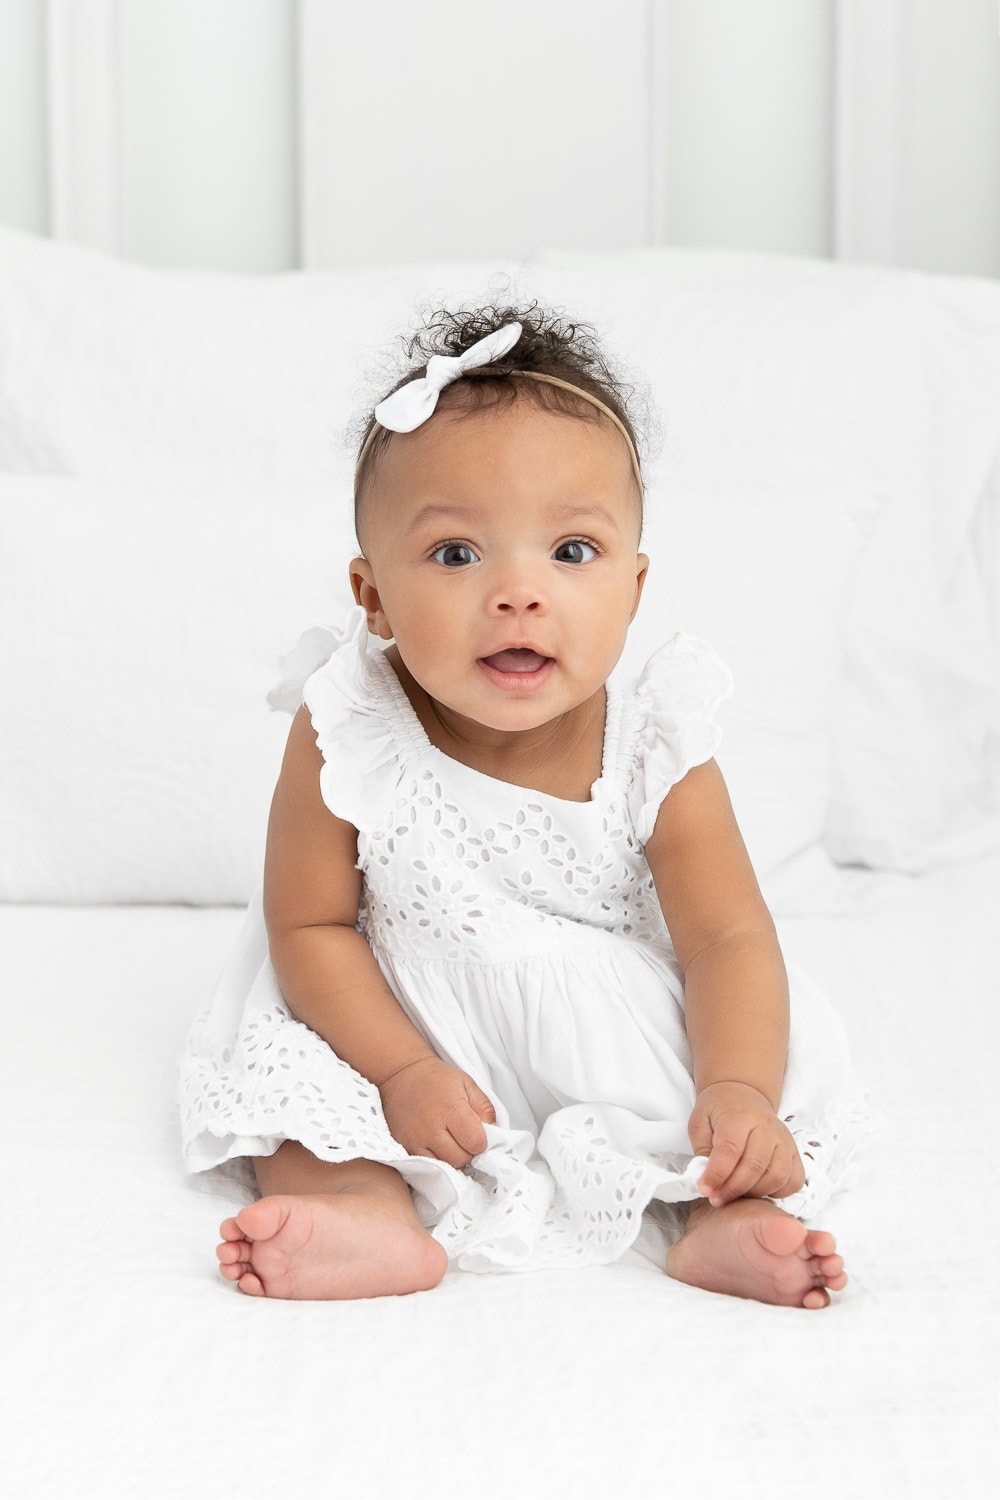 6 month old baby girl siting on lifestyle bed wearing a white eyelet dress with simple white bow